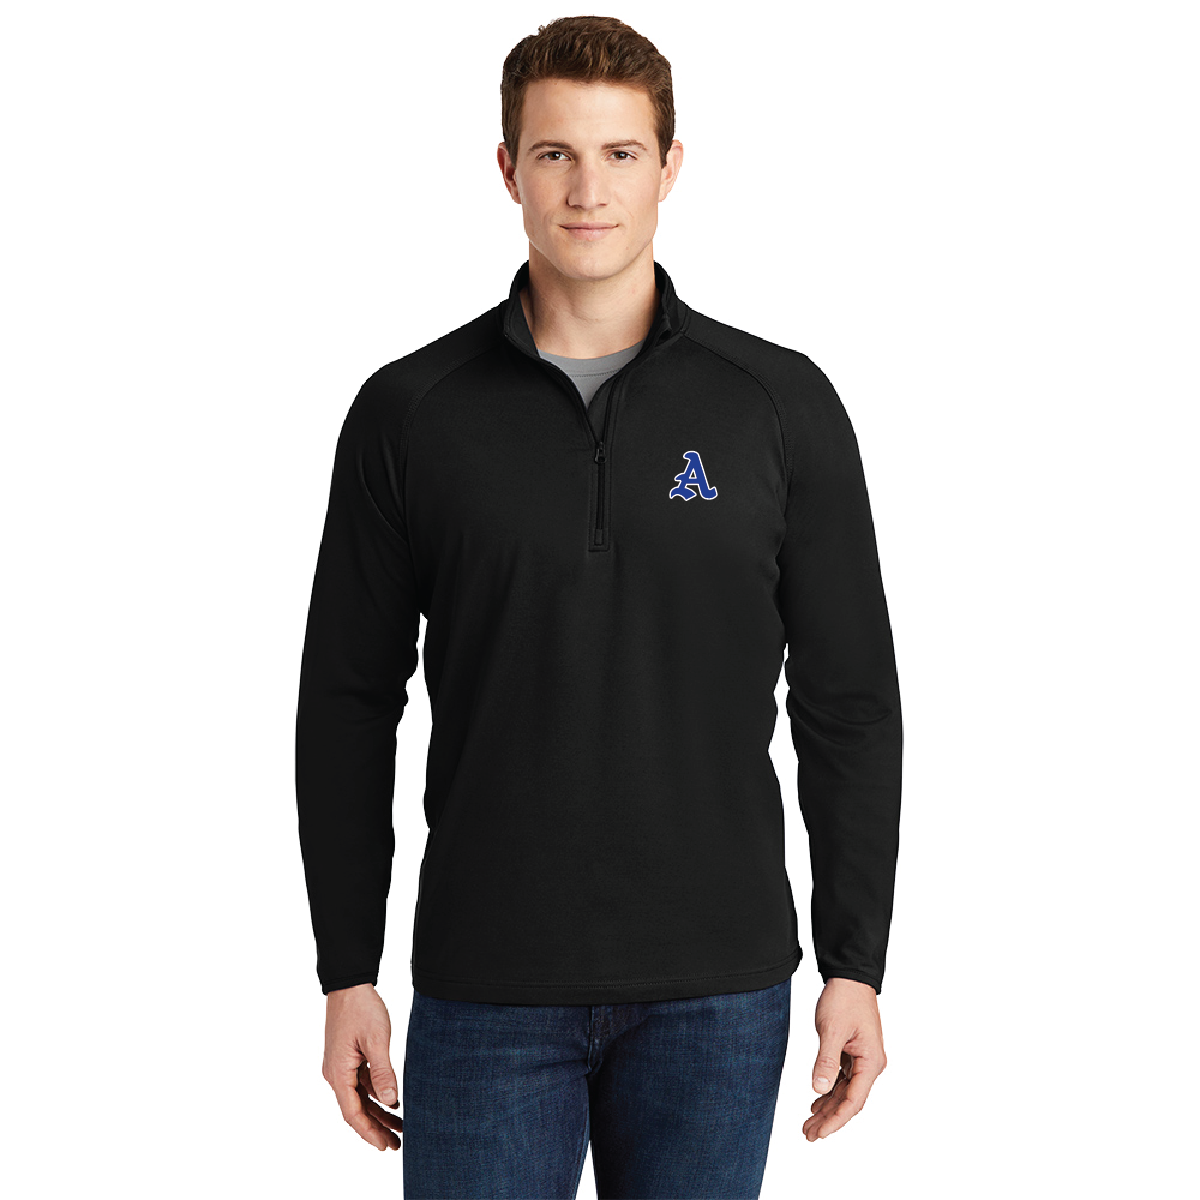 ST850 - 1/4-Zip Stretch Pullover - A – Team Store